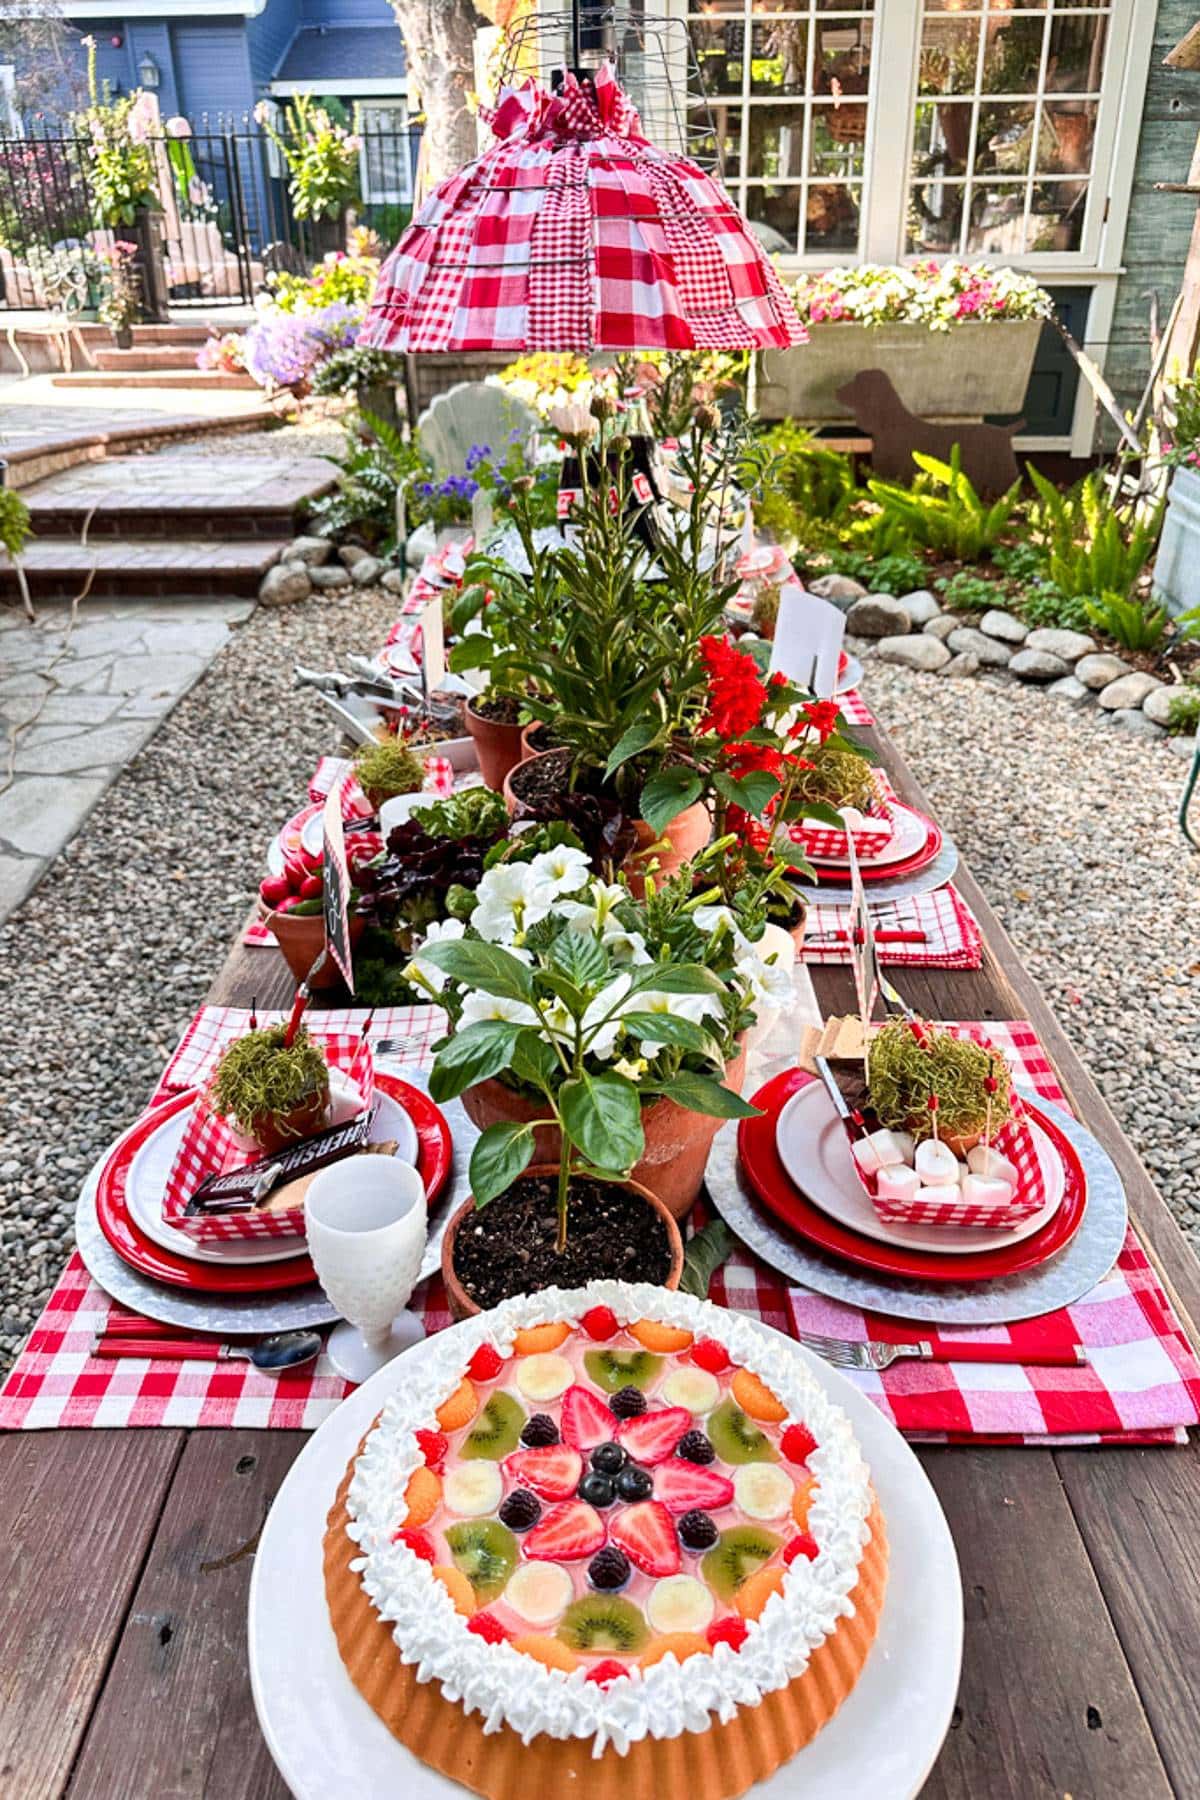 A VIEW OF MY SUMMER TABLESCAPE WITH FRUIT TARTS, SMORES, AND LOTS OF RED AND WHITE DECORATIONS. THE TABLE IS SET WITH FRESH HERBS, VEGETABLES AND FRUIT .